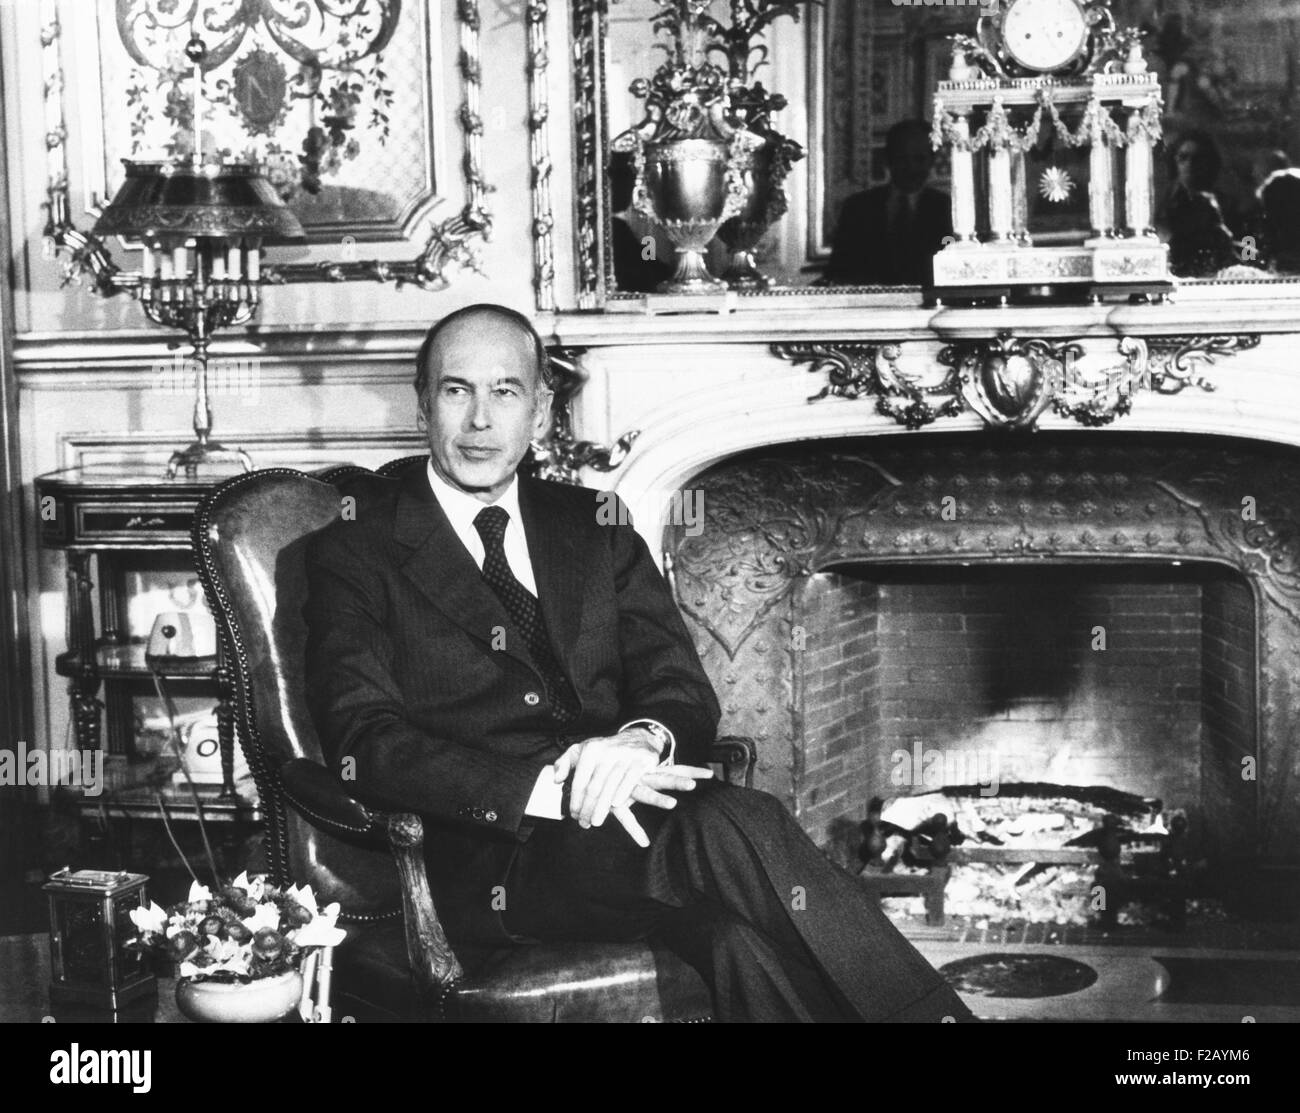 French President Valery Giscard d'Estaing delivered a 'fireside chat' from the Elysee Palace. It was broadcast on Feb. 25, 1975. (CSU 2015 9 755) Stock Photo